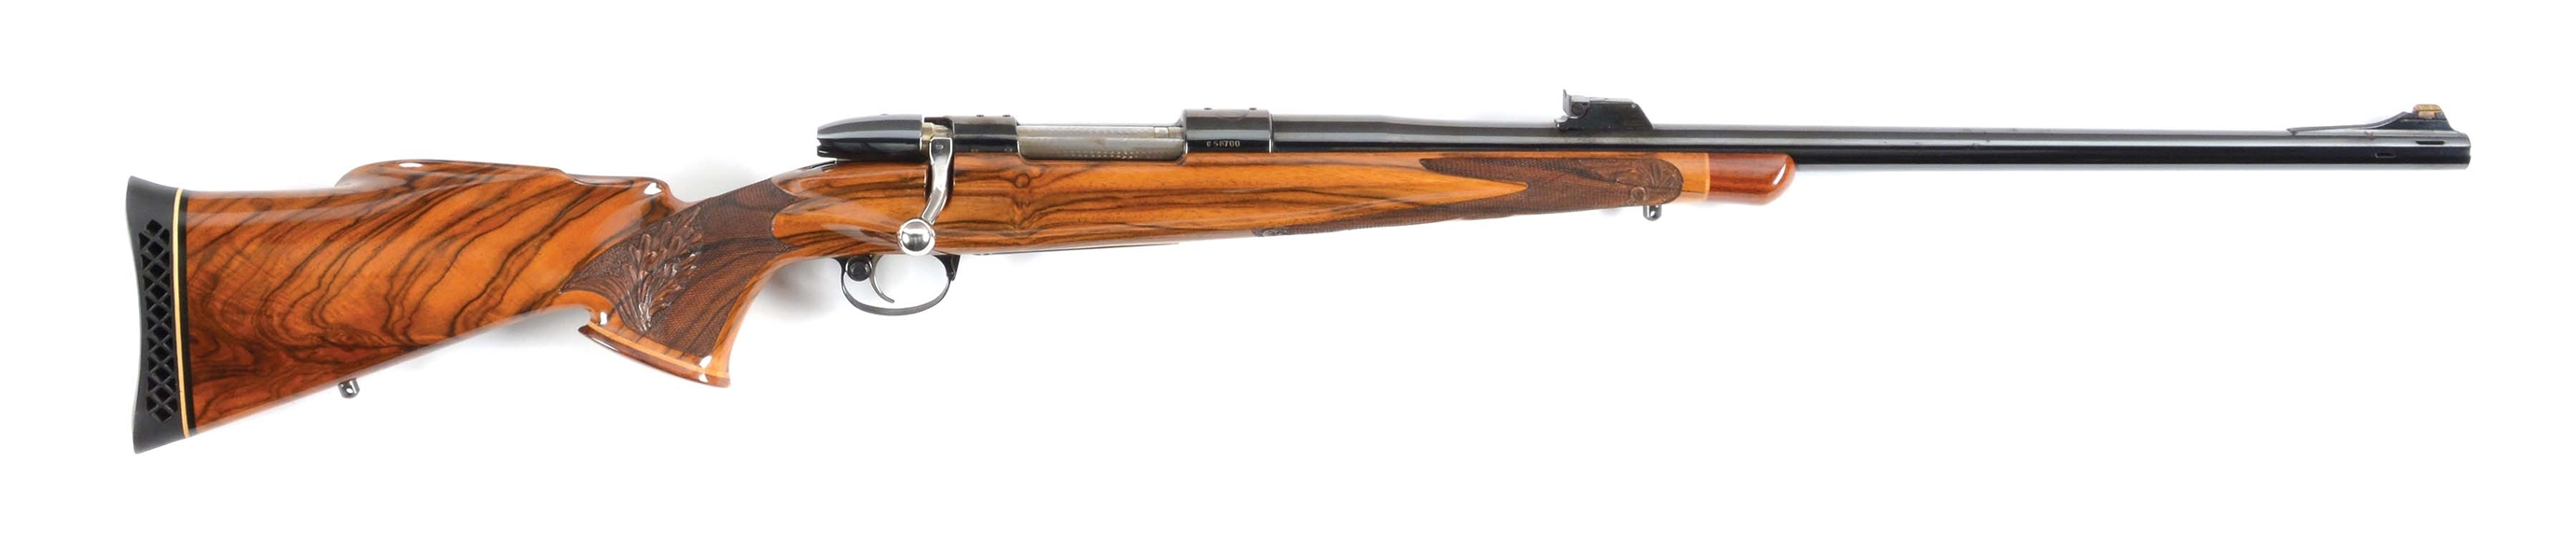 (M) FN BOLT ACTION .416 TAYLOR SPORTING RIFLE.